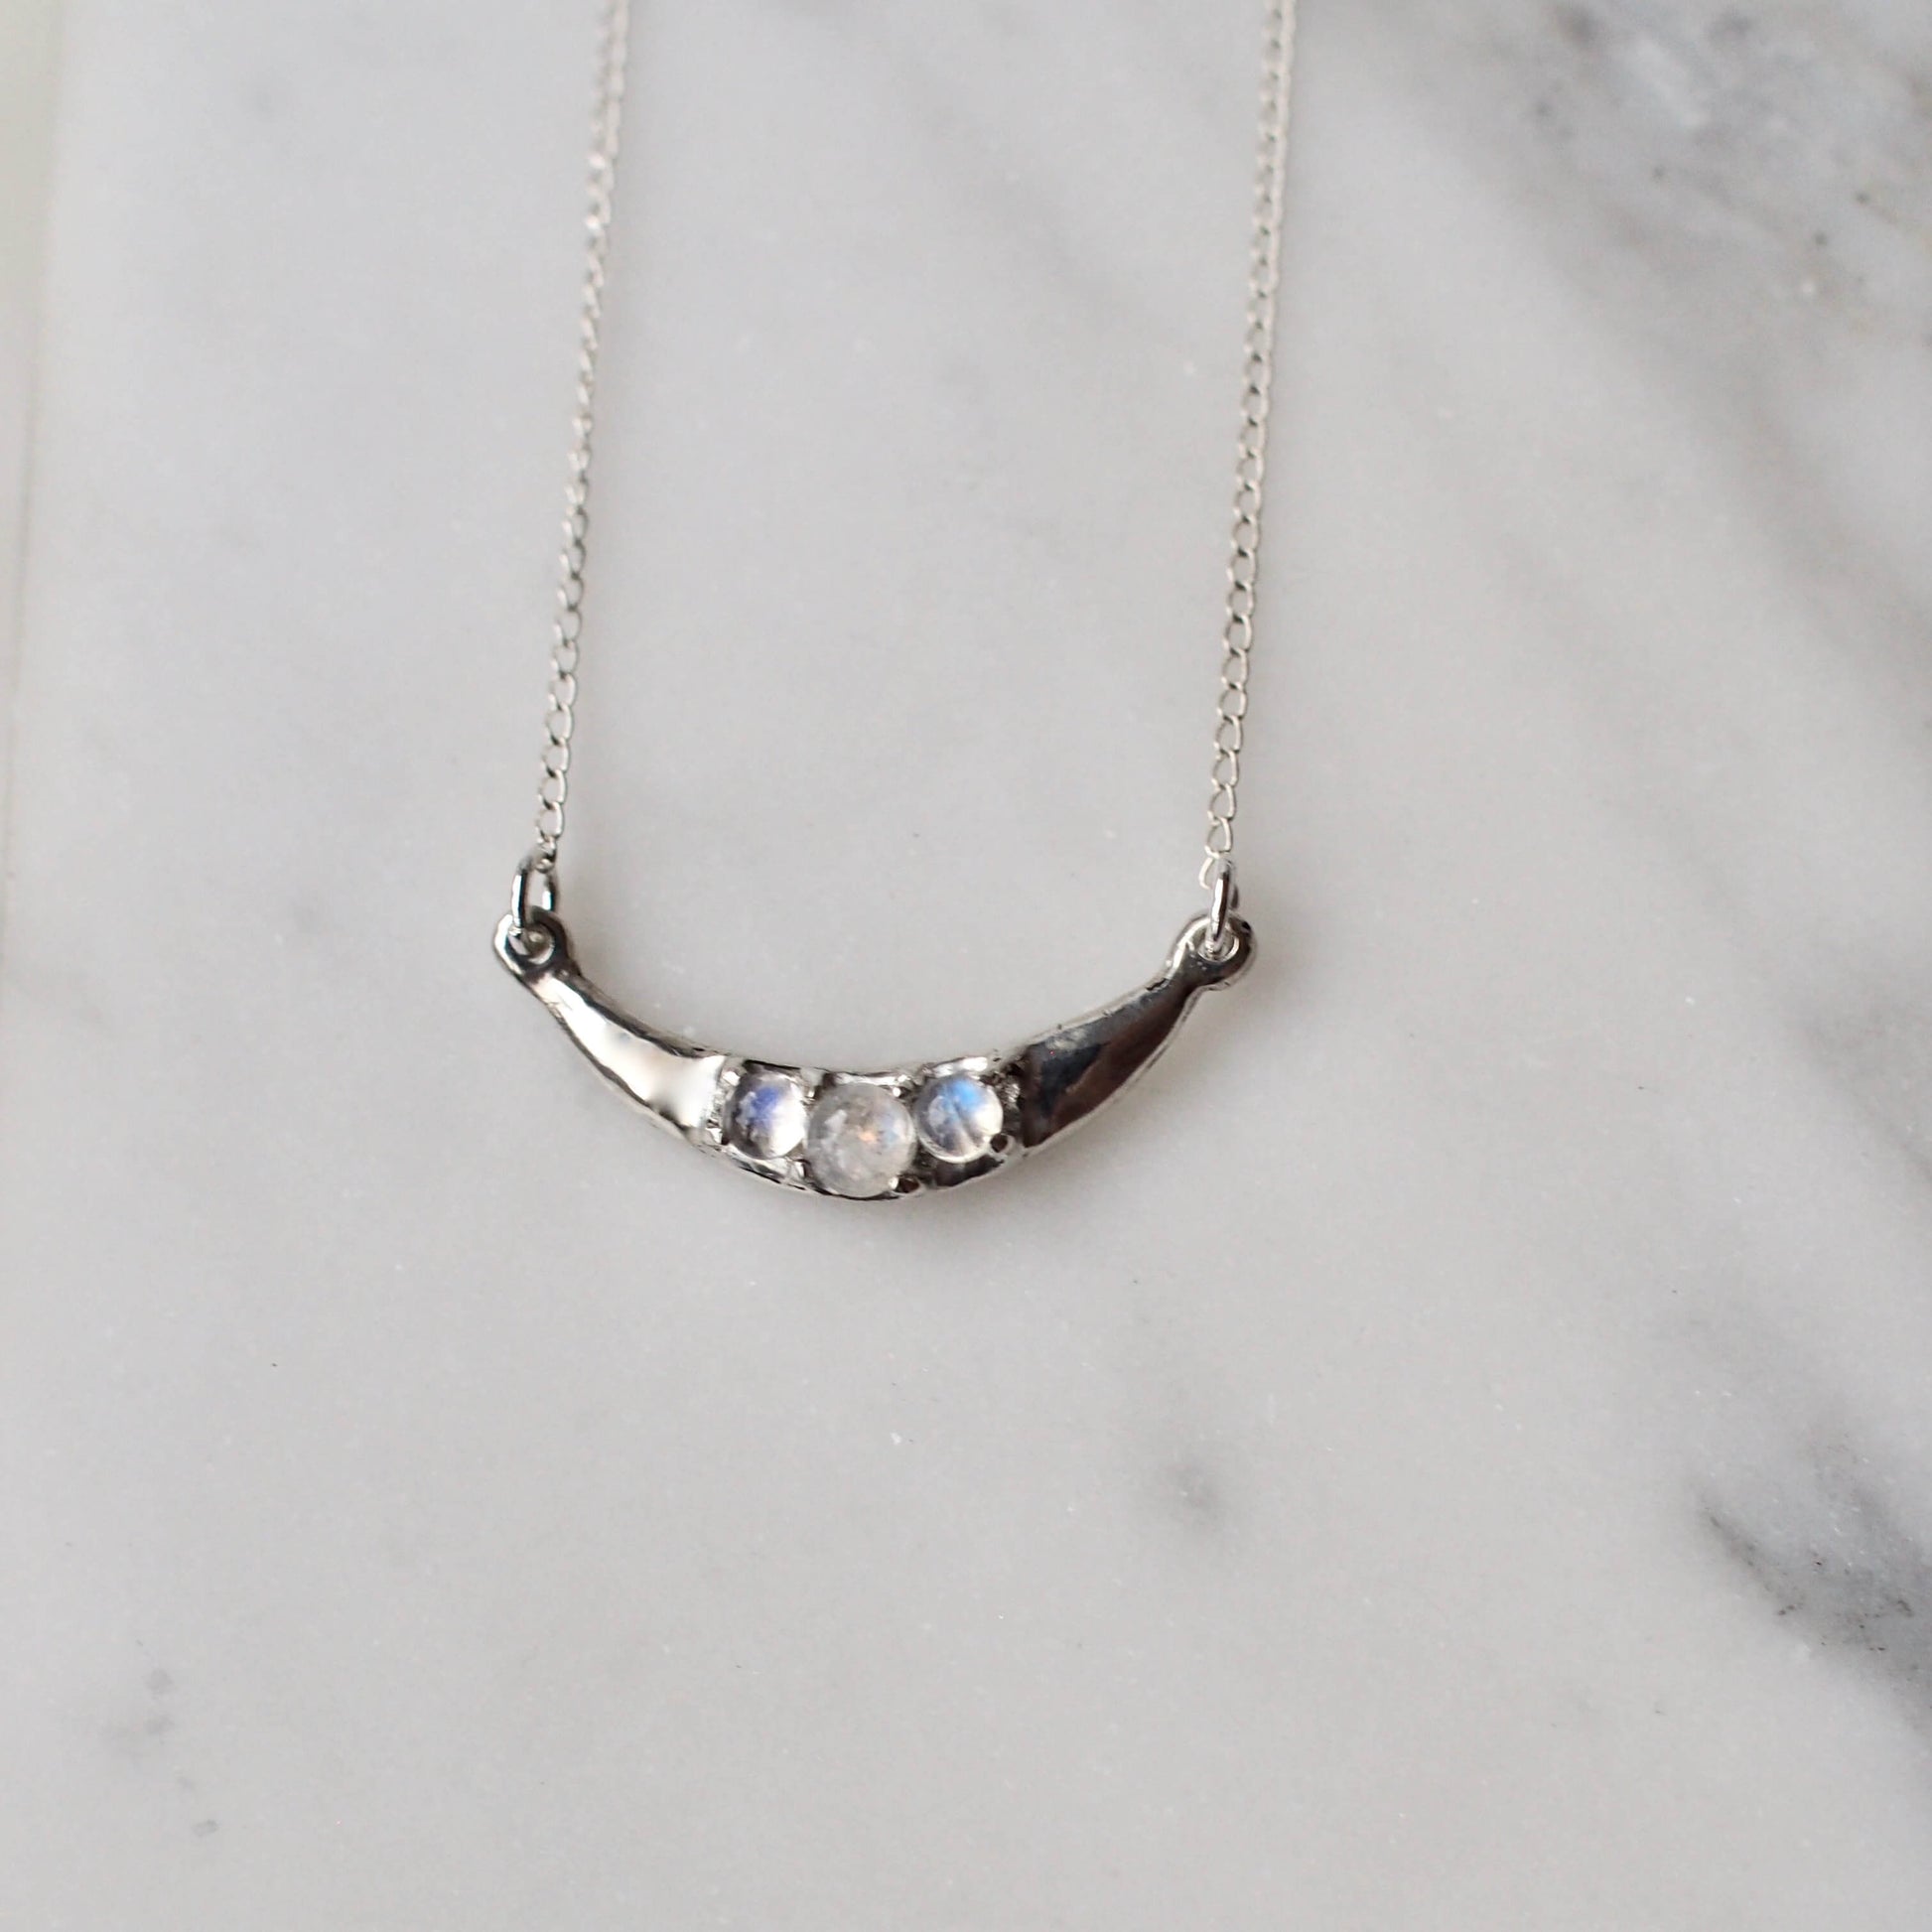 Crescent Moon necklace set with sustainably sourced moonstone, set in sterling silver. Made by hand in the USA by Iron Oxide